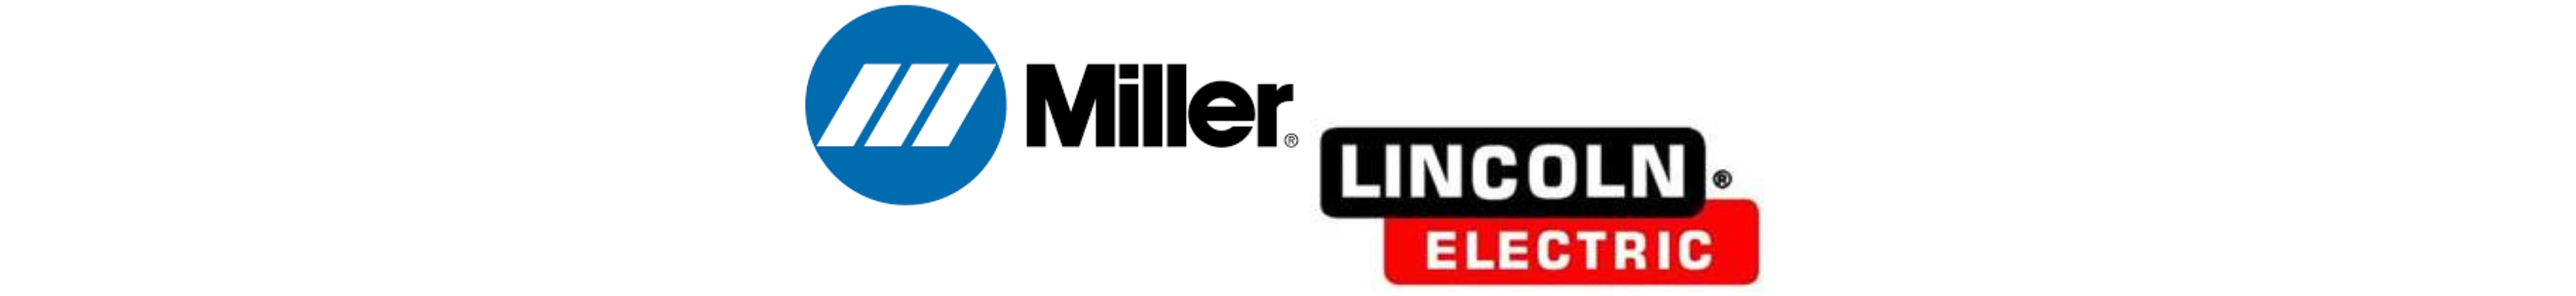 Continental Engines sales welder parts from the most trusted names in the industry; Miller and Lincoln Electric.